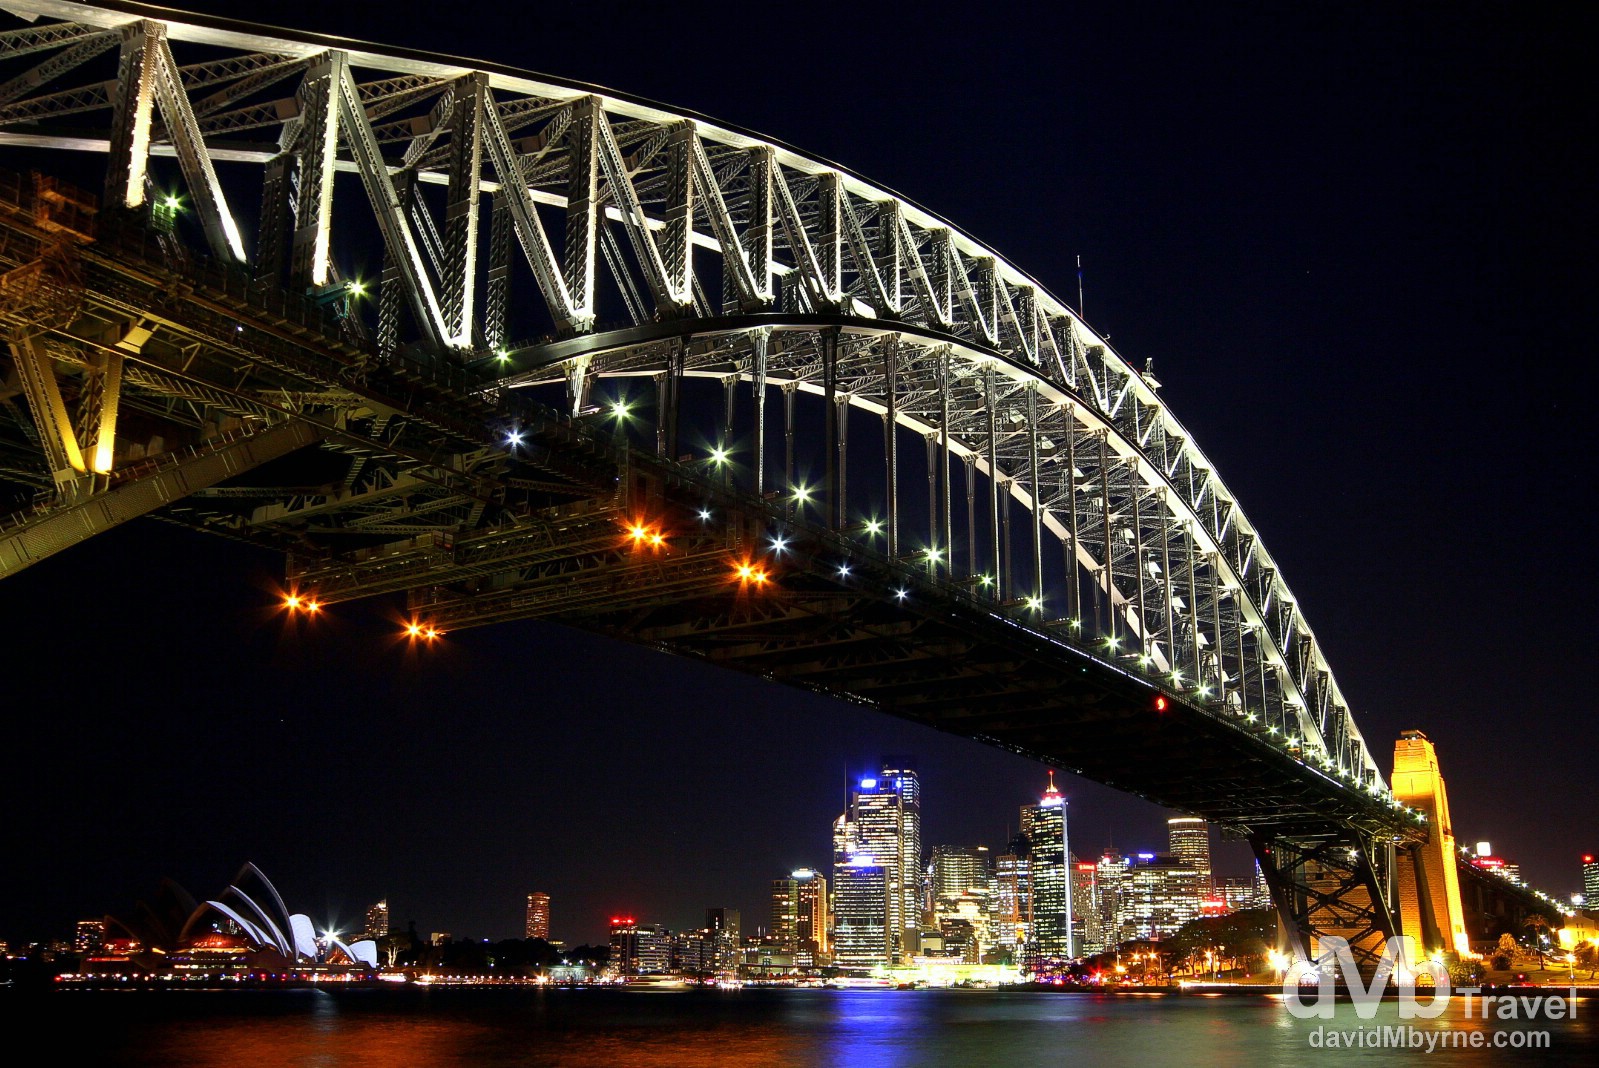 The Sydney CBD as seen at night from under the Harbour Bridge in the Kirribilli district of the city. June 7th 2012.  